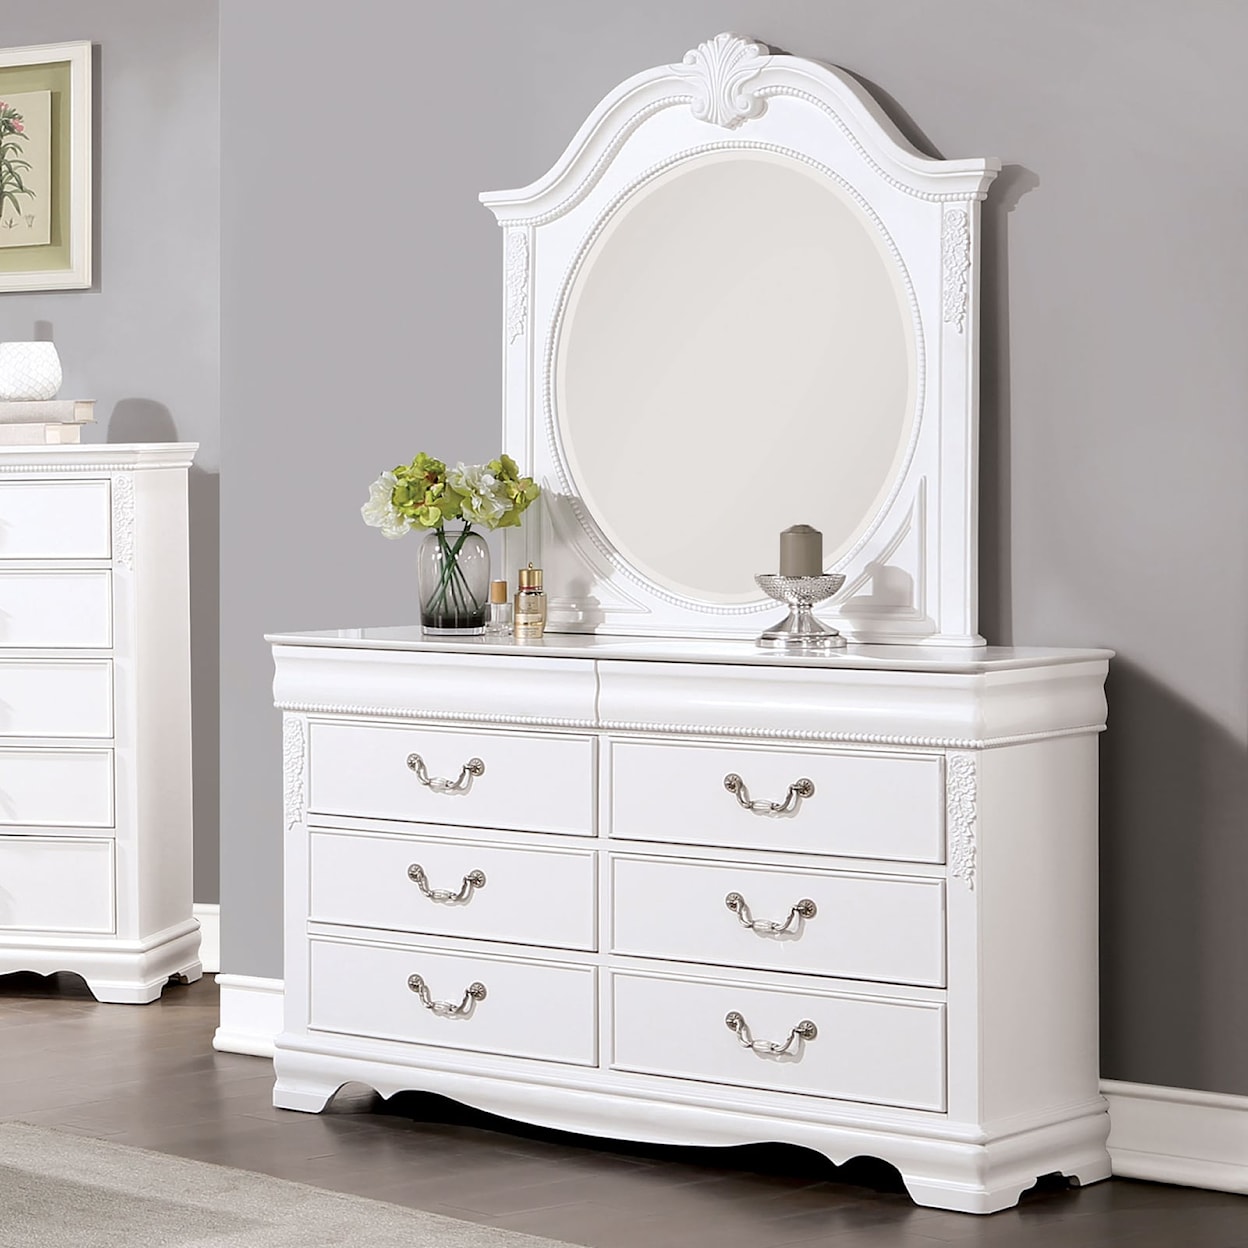 Furniture of America Alecia 6-Drawer Dresser with Carved Wood Accents